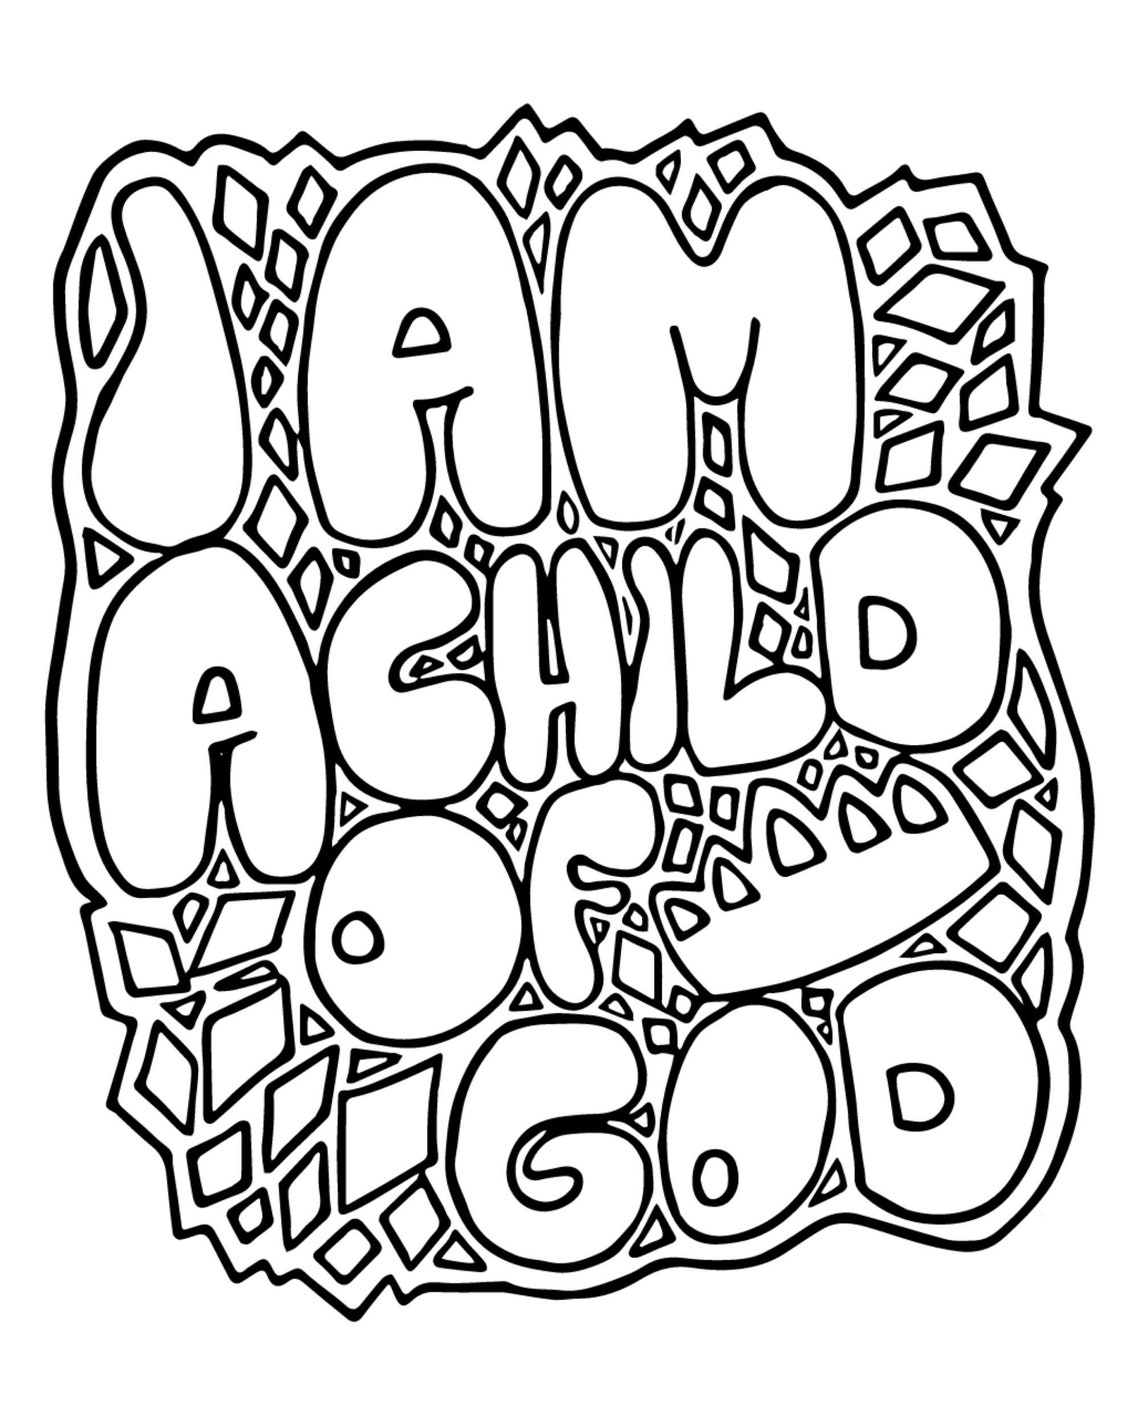 affirmations-coloring-book-for-kids-christ-coloring-book-etsy